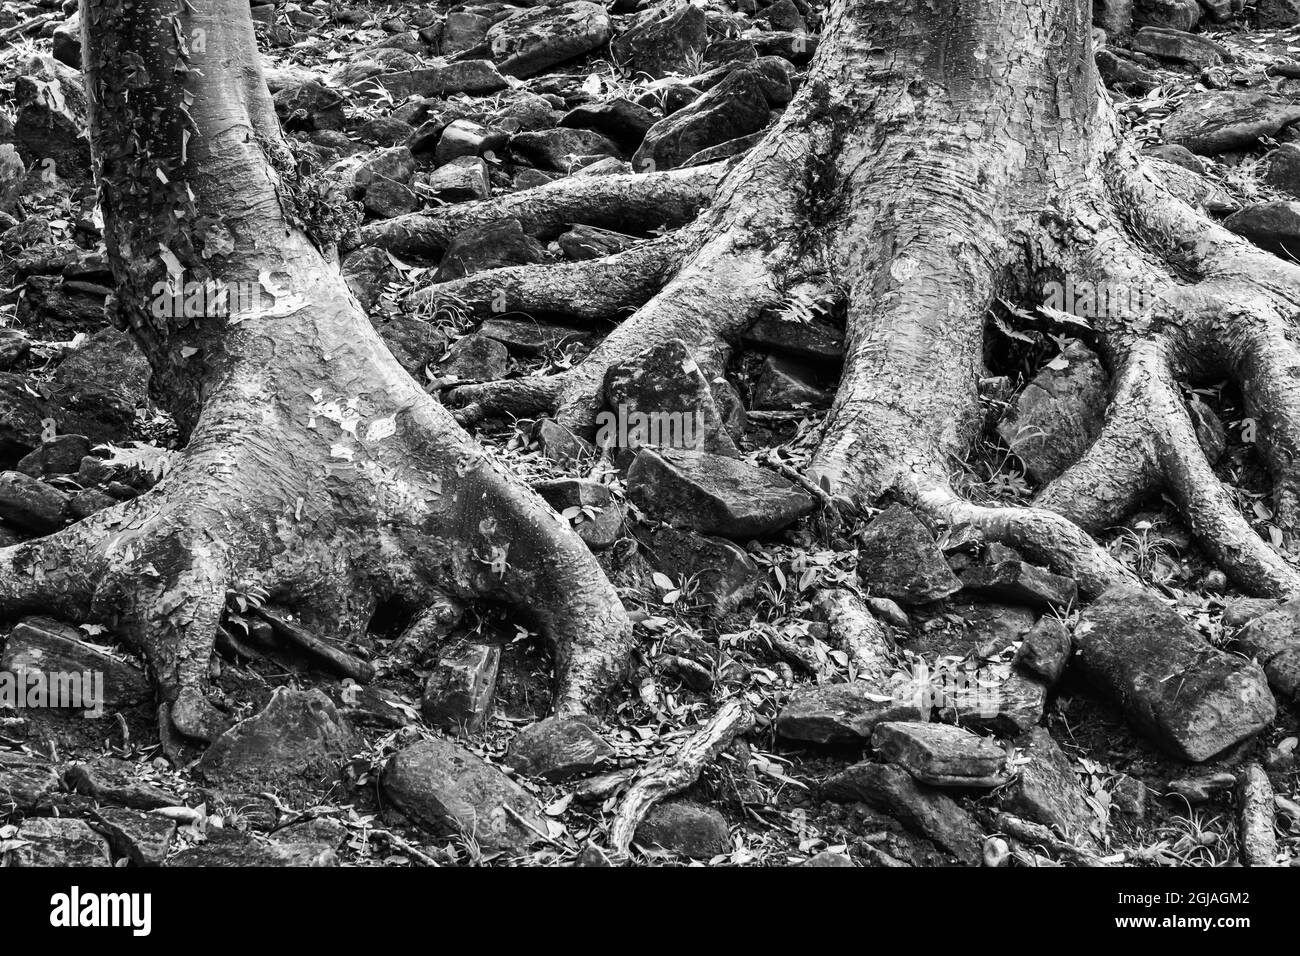 Belize, Toledo. Tree roots and ruin stones, Lubaantun Archeological Site. Stock Photo